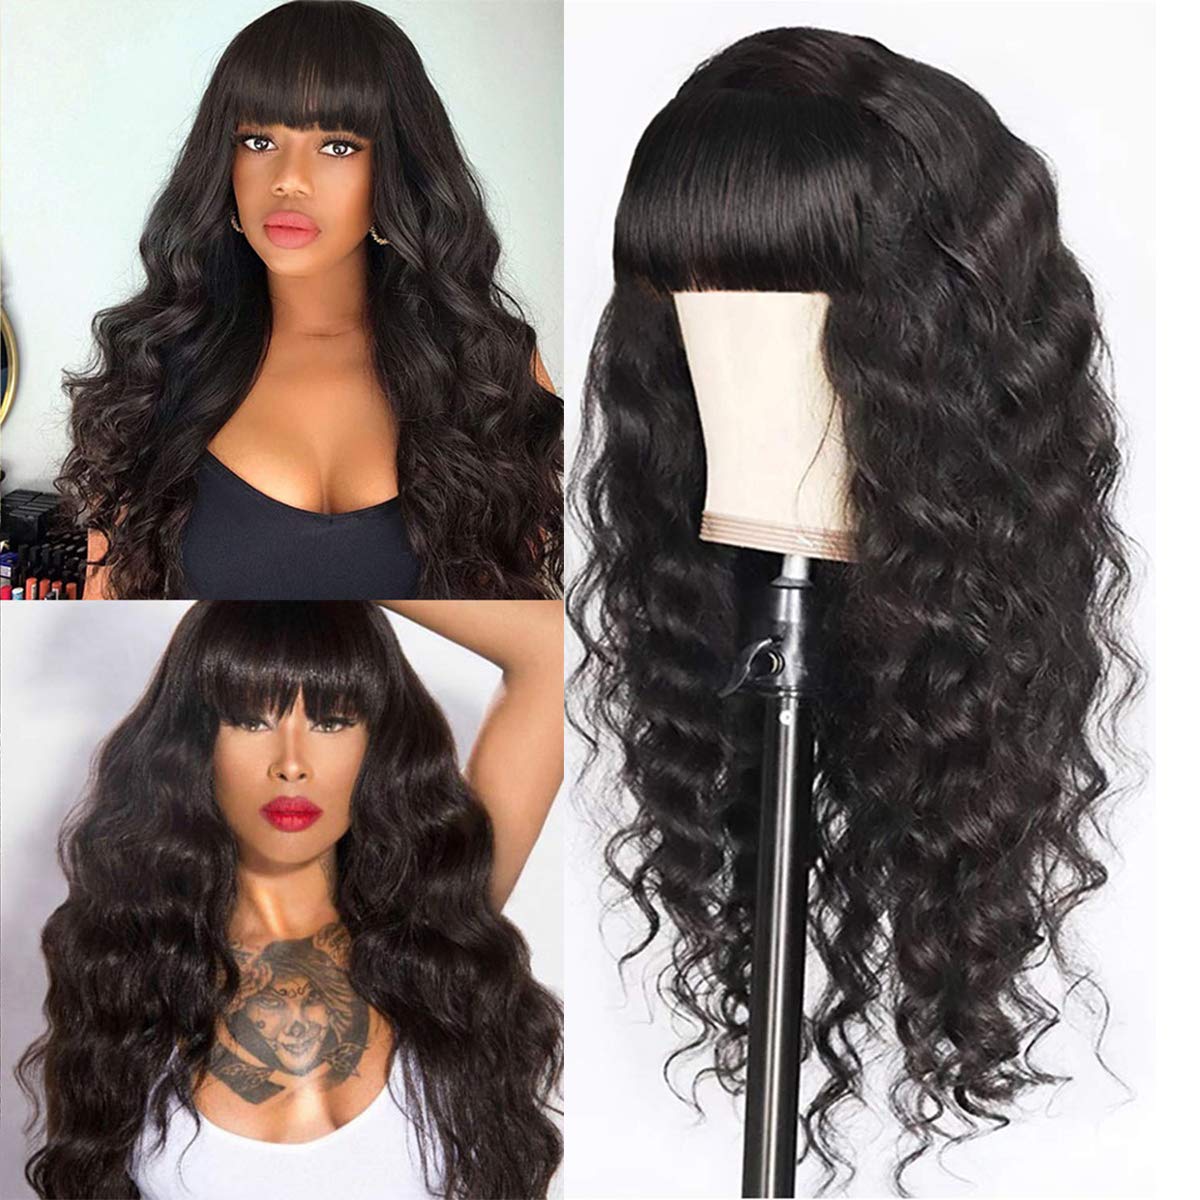 Gluna Hair Loose Deep Wave Wigs With Bangs 150% Density None Lace Human Hair Wigs Glueless Machine Made Wigs for Black Women Brazilian Virgin Hair Natural Color